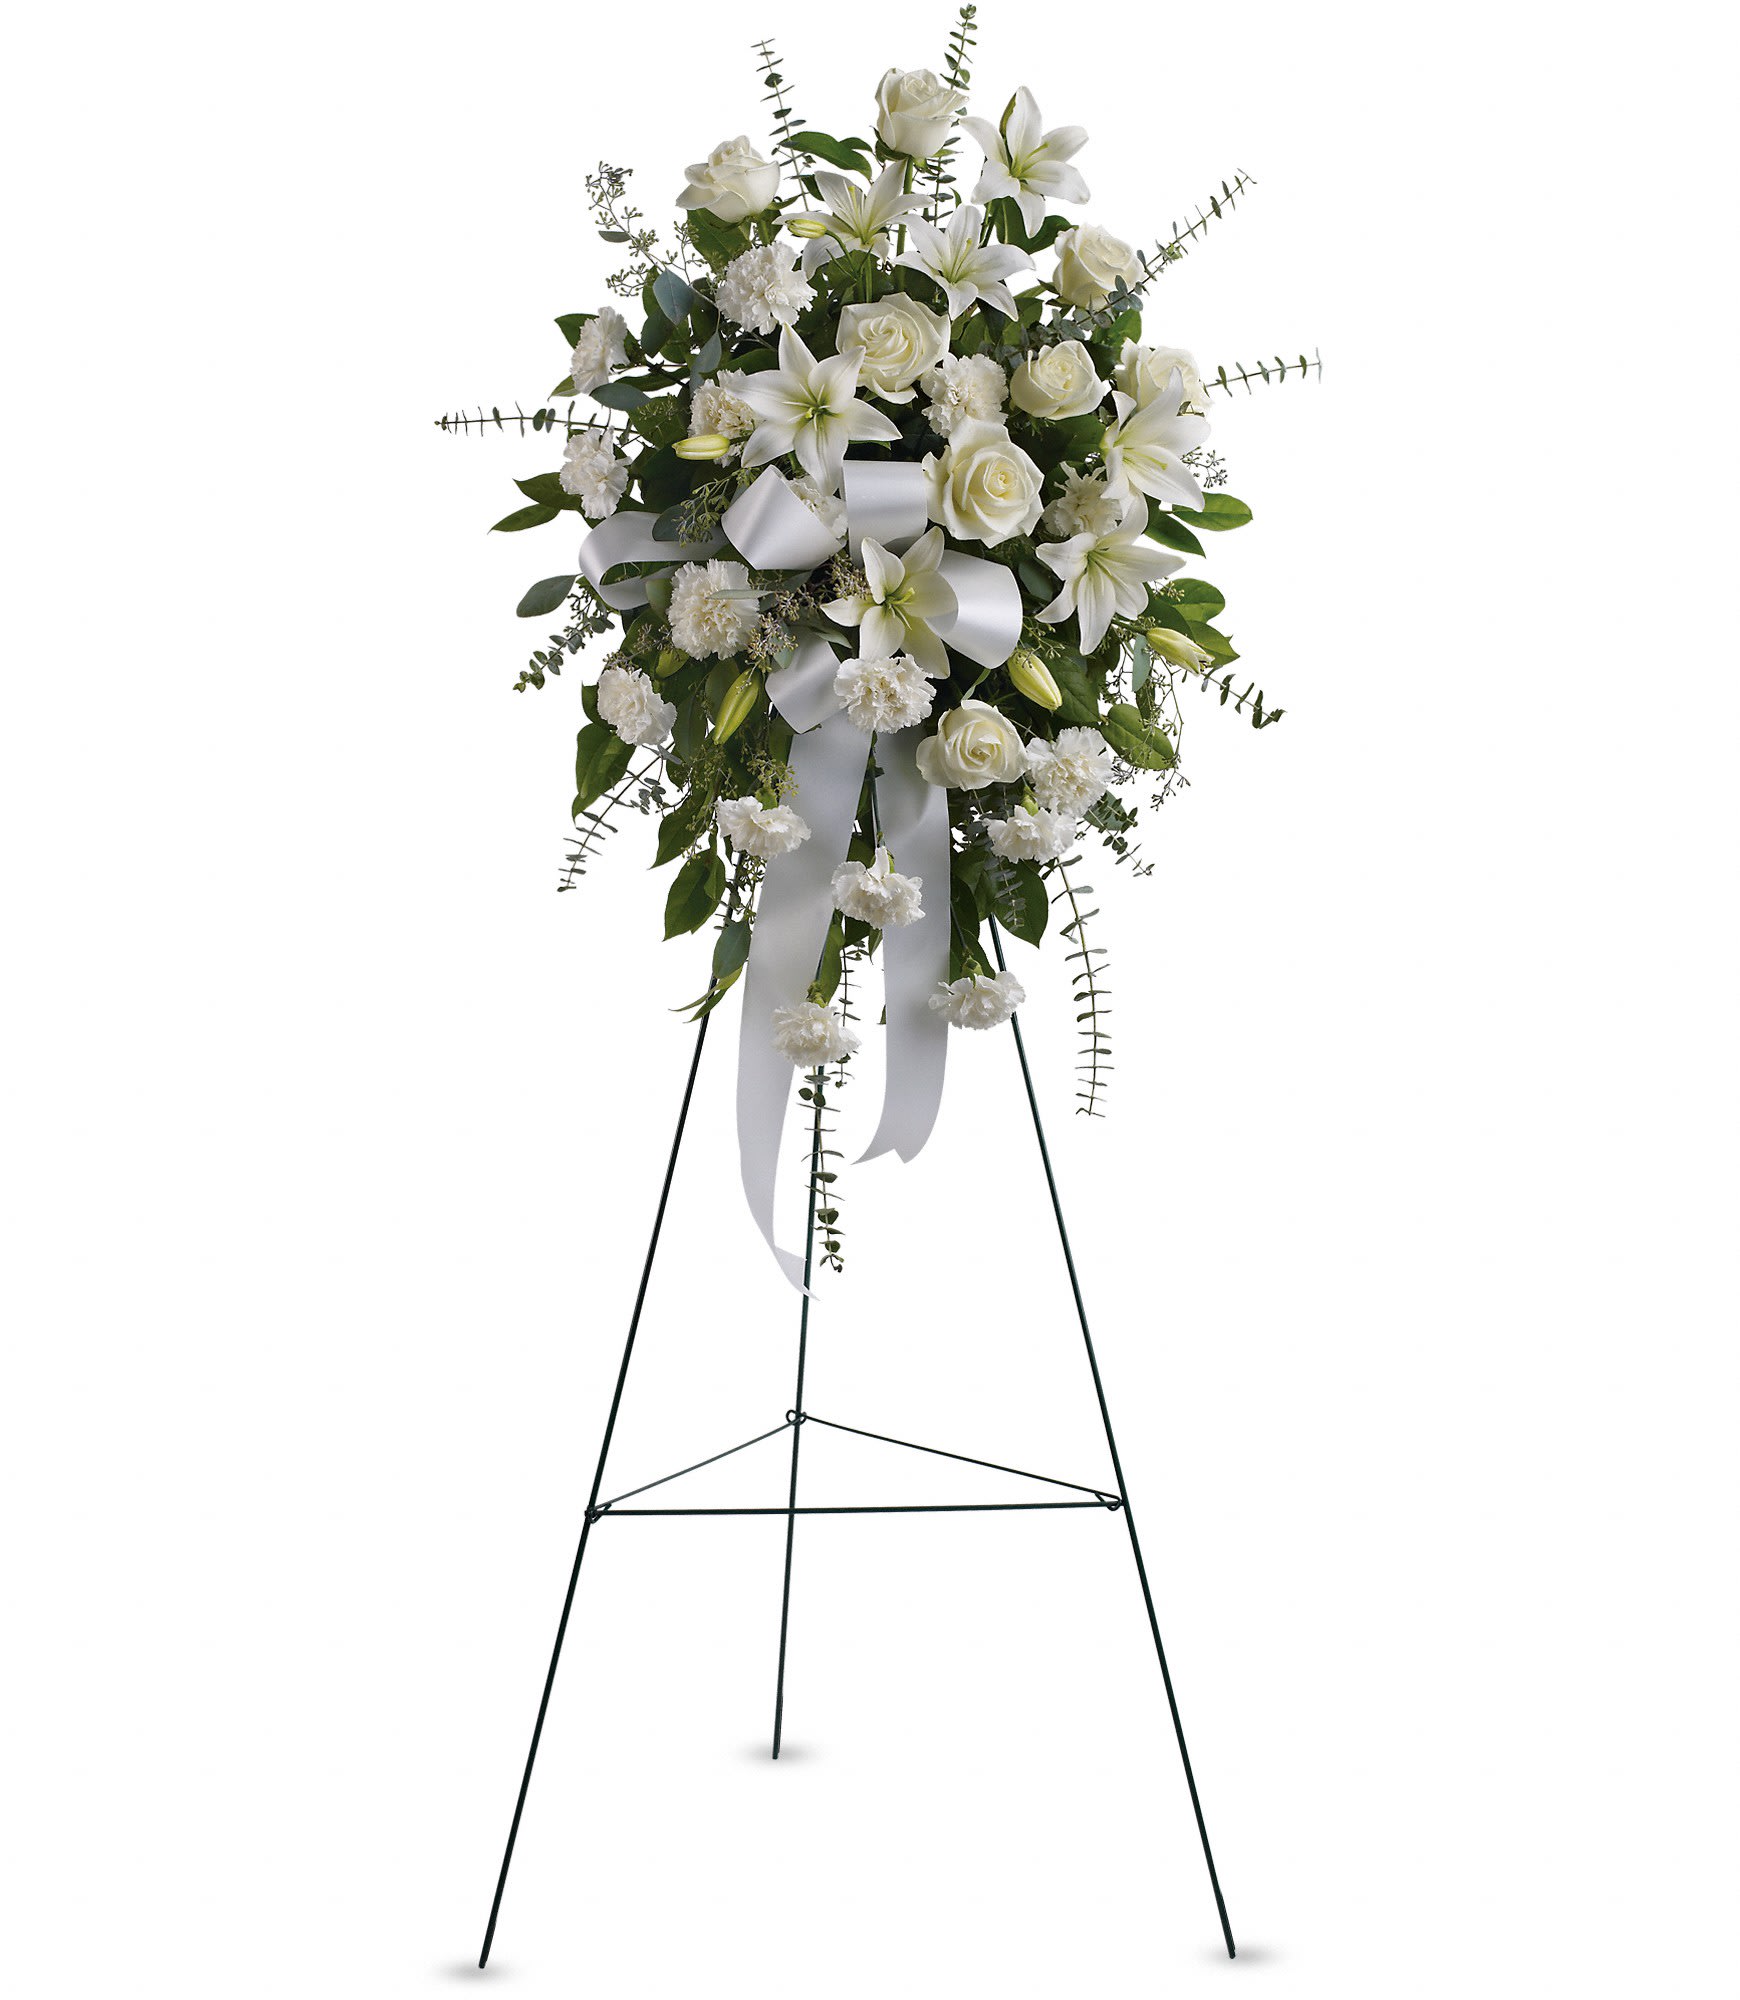 Sentiments of Serenity Spray  - Beautifully simple, this lovely spray of white roses, lilies and carnations decorated with white satin ribbon is a tasteful way to express your sympathy. T262-1A. 